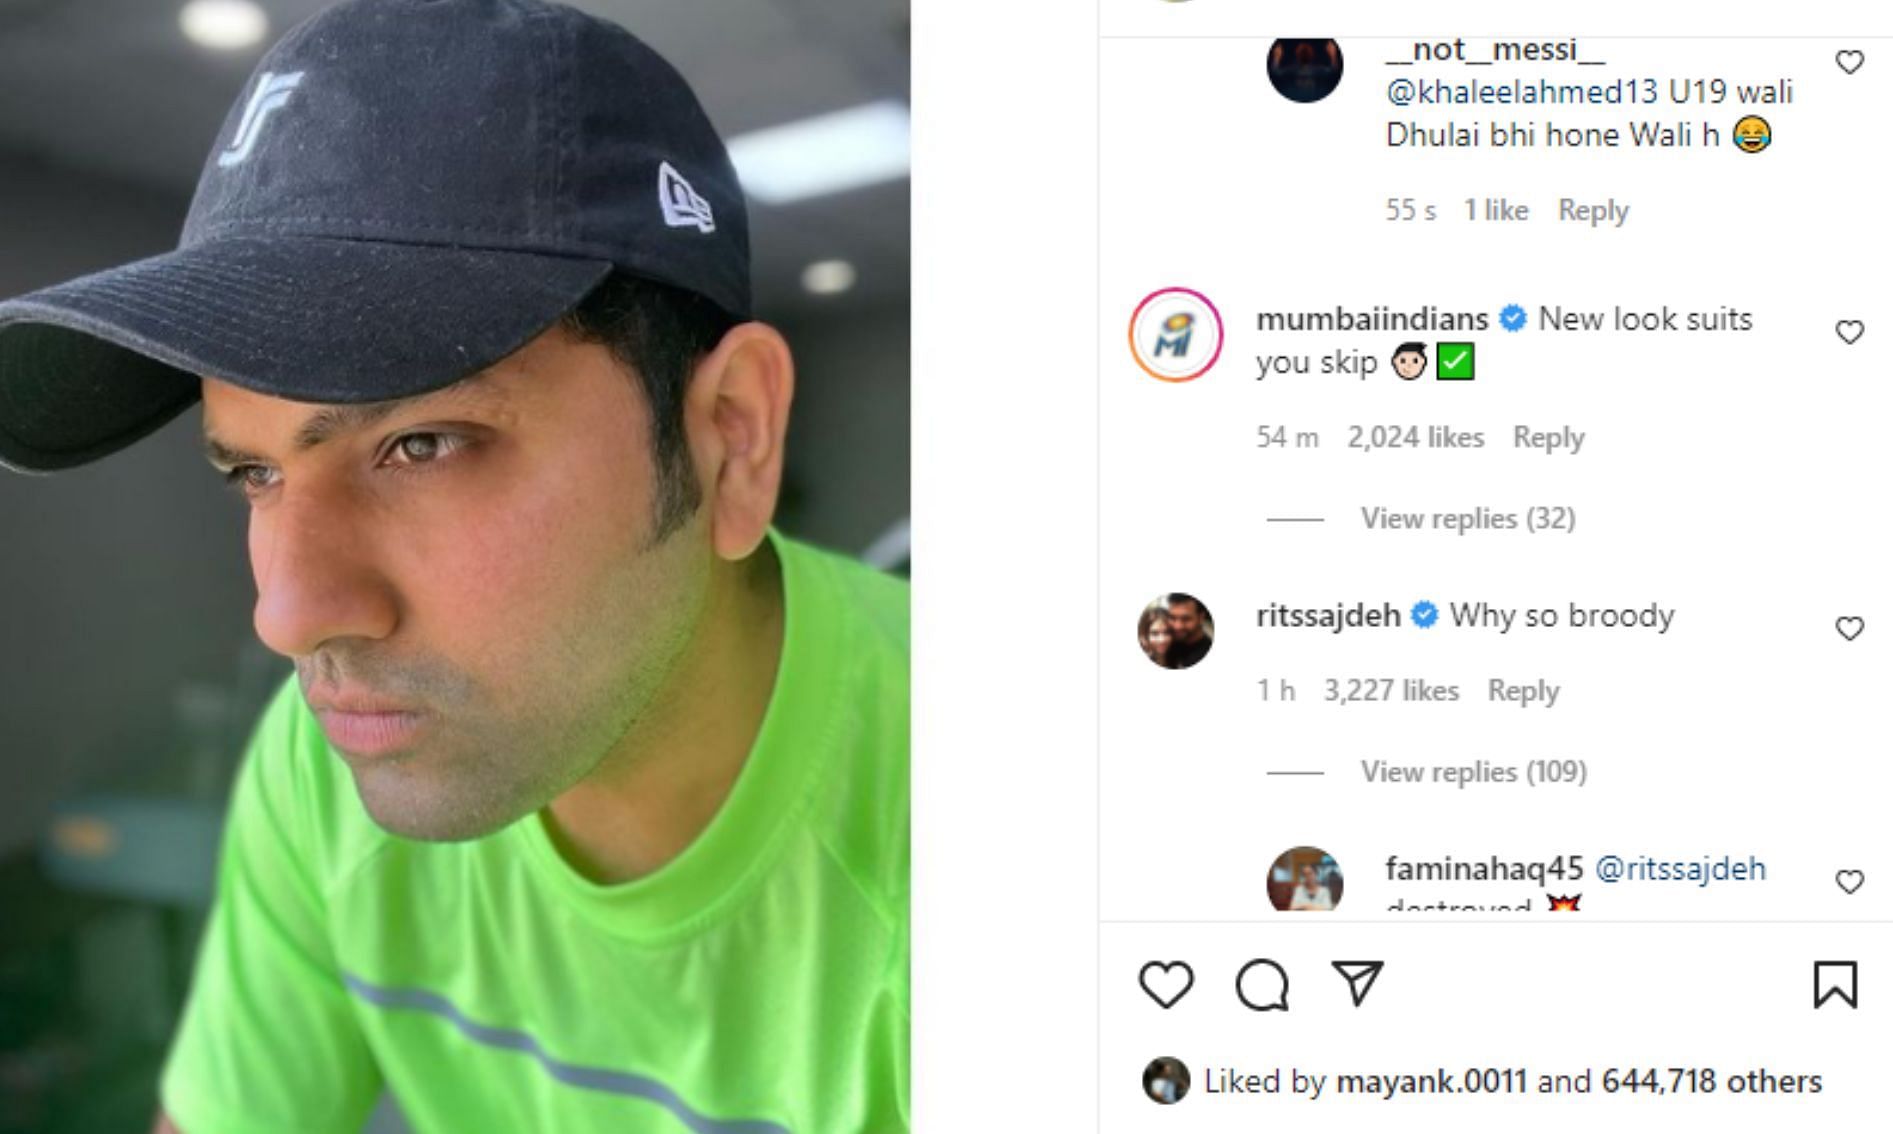 Rohit Sharma has shared an image of his new look on Instagram.